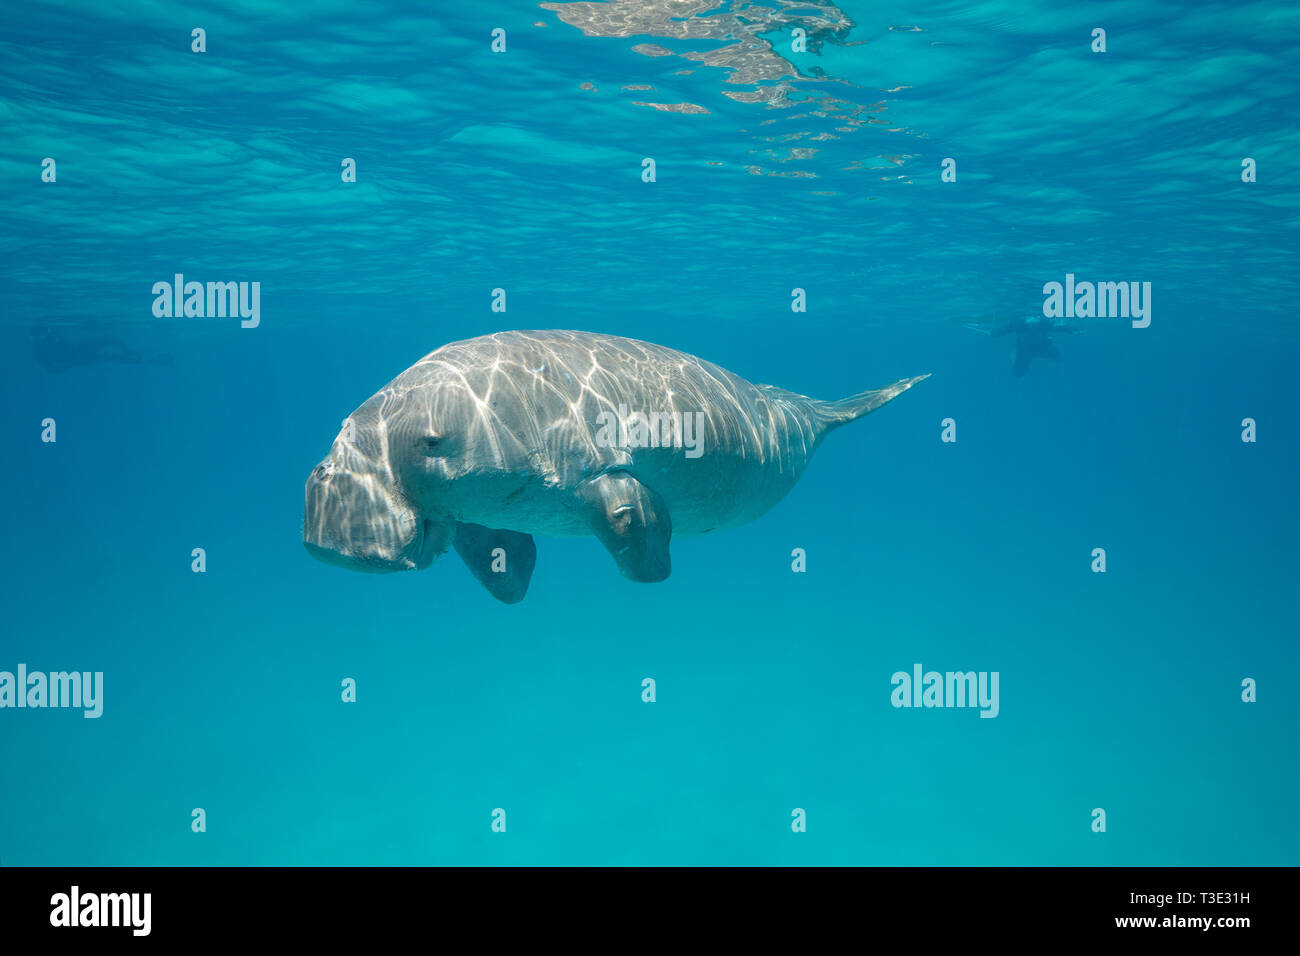 male dugong or sea cow, Dugong dugon, Critically Endangered Species,  snorkelers in background, Calauit Island, Calamian Islands, Palawan, Philippines Stock Photo